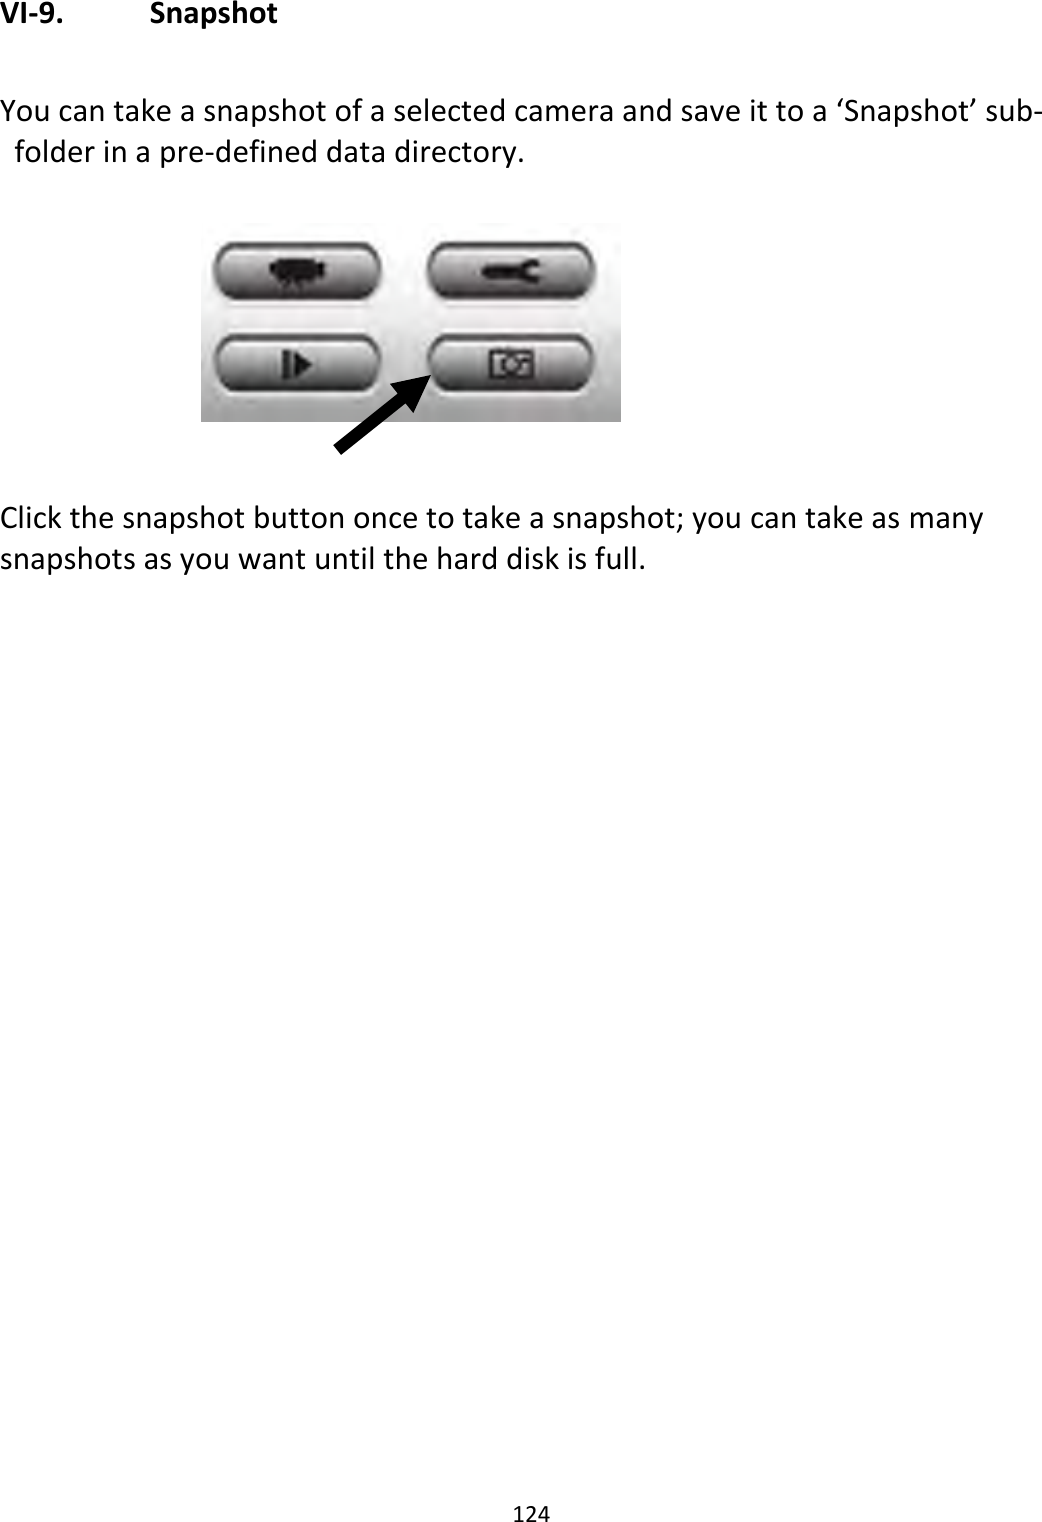 124  VI-9.   Snapshot  You can take a snapshot of a selected camera and save it to a ‘Snapshot’ sub-folder in a pre-defined data directory.         Click the snapshot button once to take a snapshot; you can take as many snapshots as you want until the hard disk is full.   